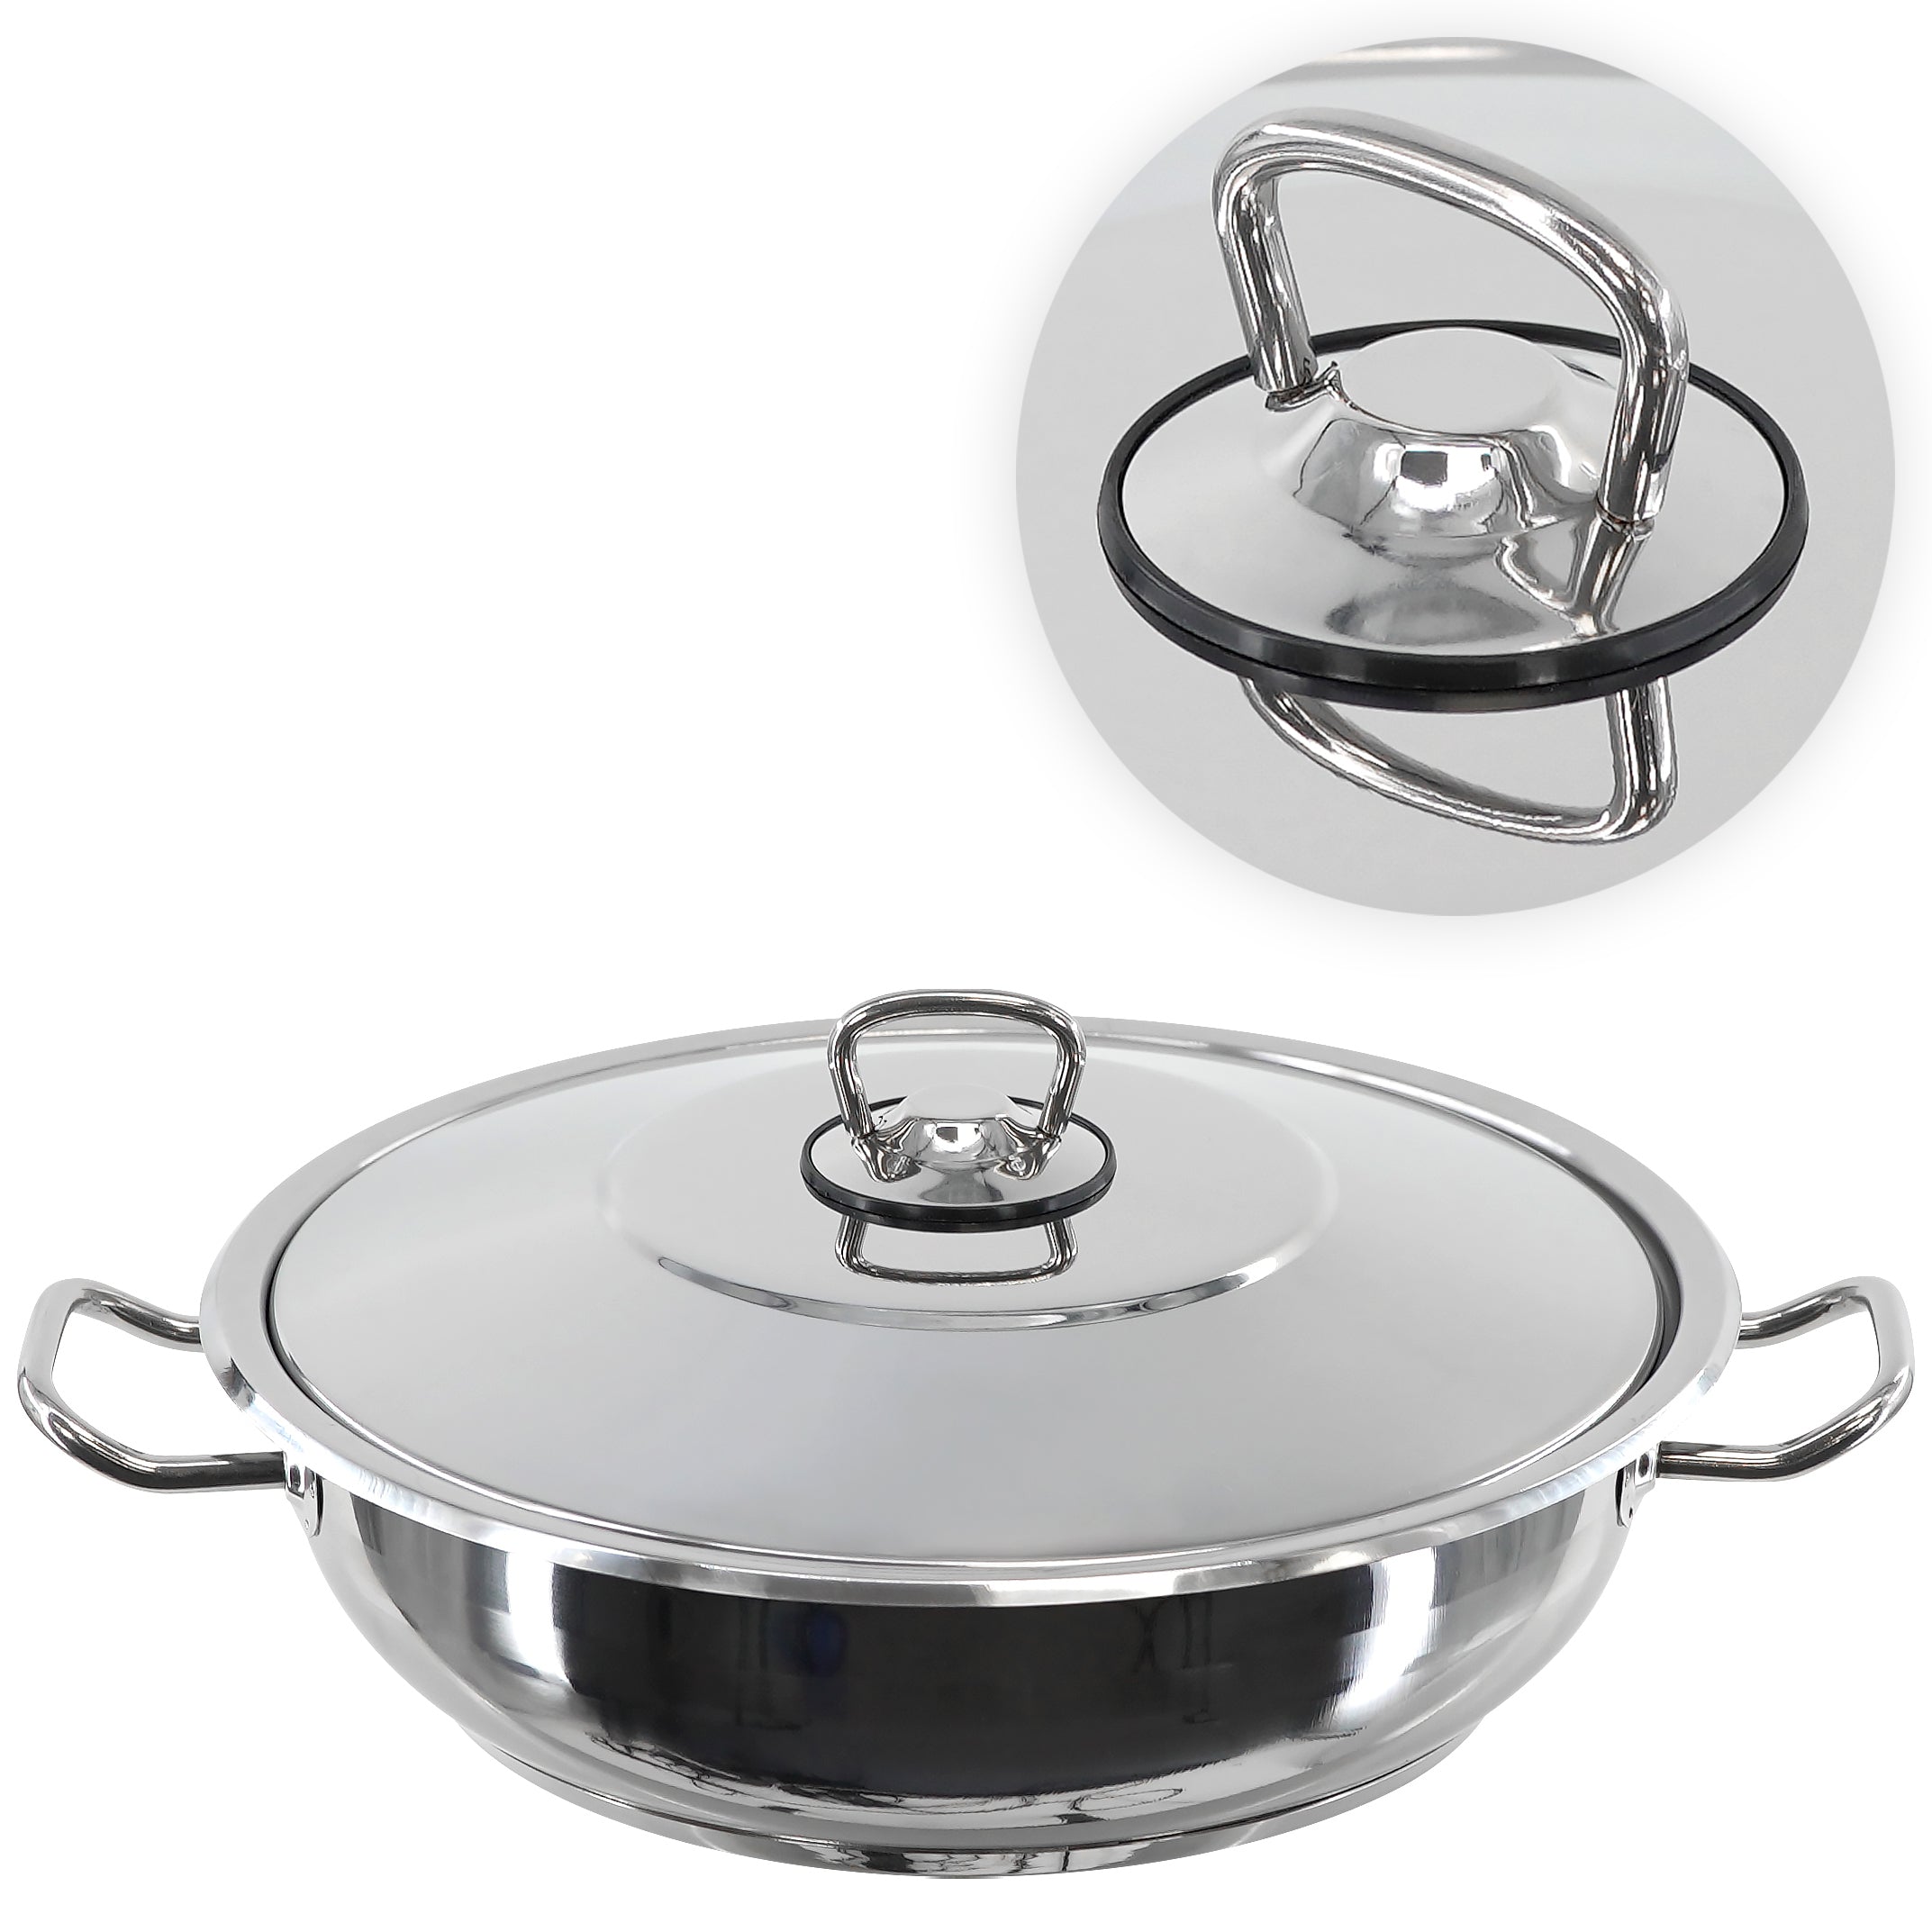 GEEZY Kitchen Gastro Shallow Pot With Lid 28 x 8 cm